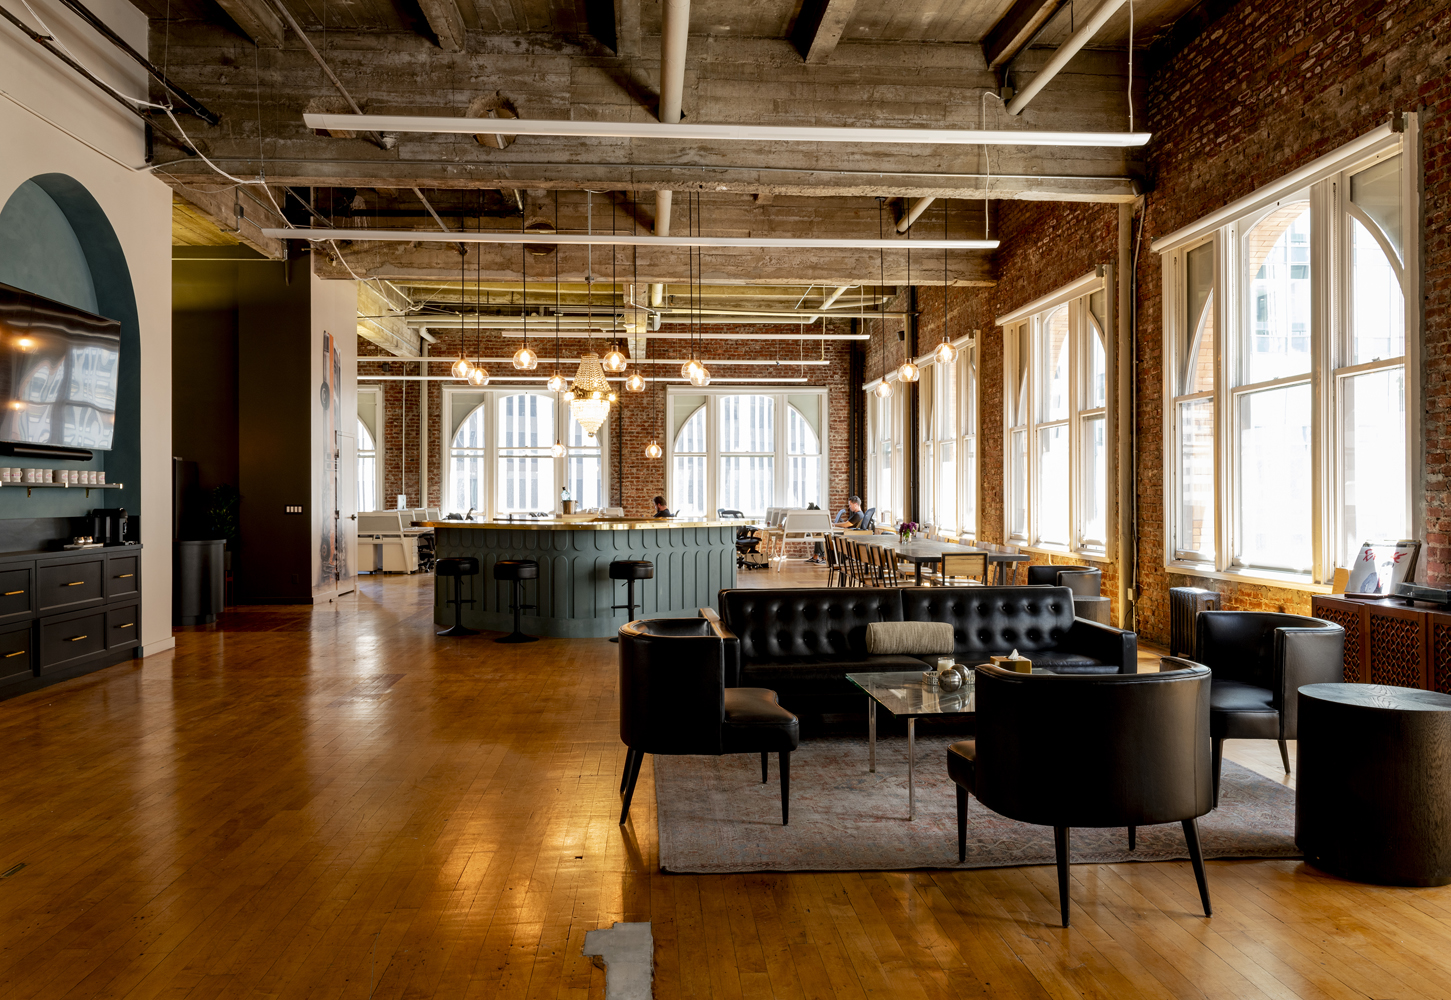 SF Ad Agency Installs “Doom Spiral” Bar in New Offices